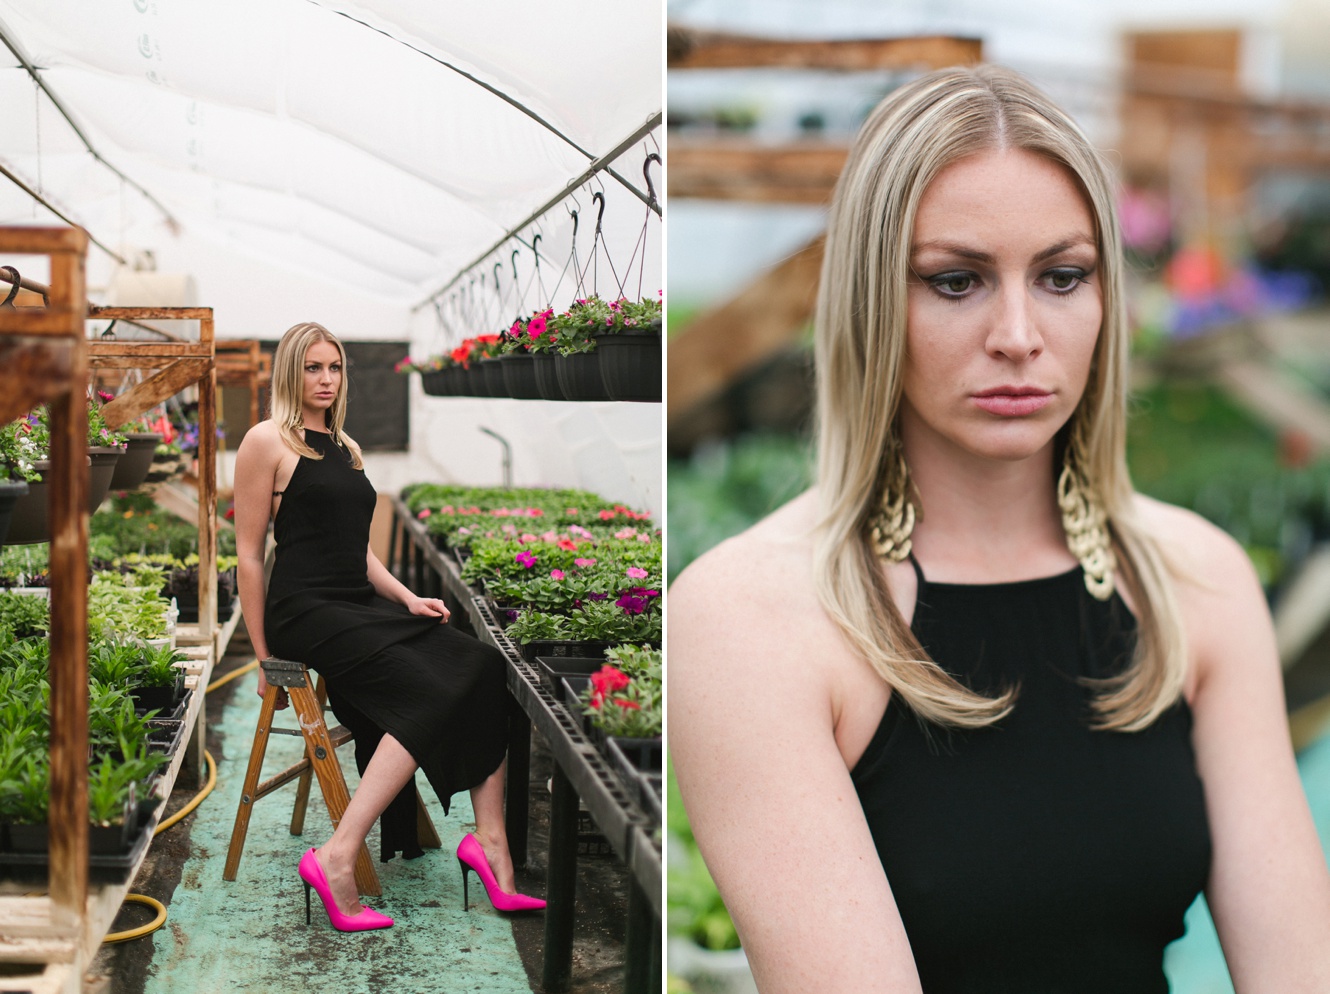 Yves Saint Laurent inspired fashion photo shoot in greenhouse